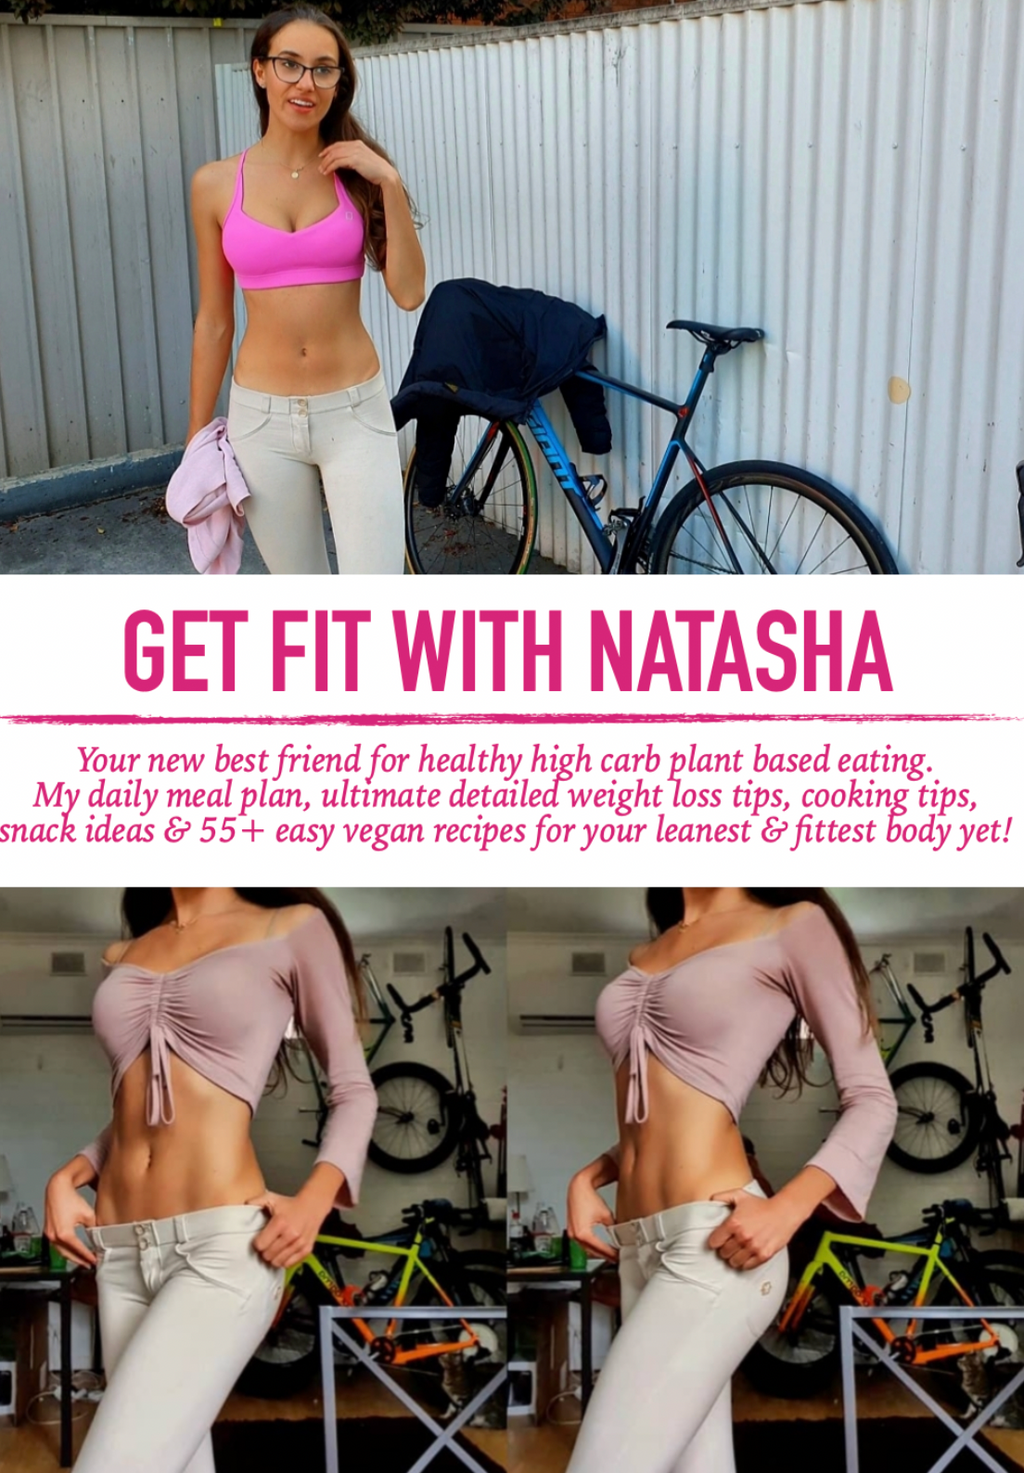 Get Fit with Natasha's Weight Loss and Recipe eBook